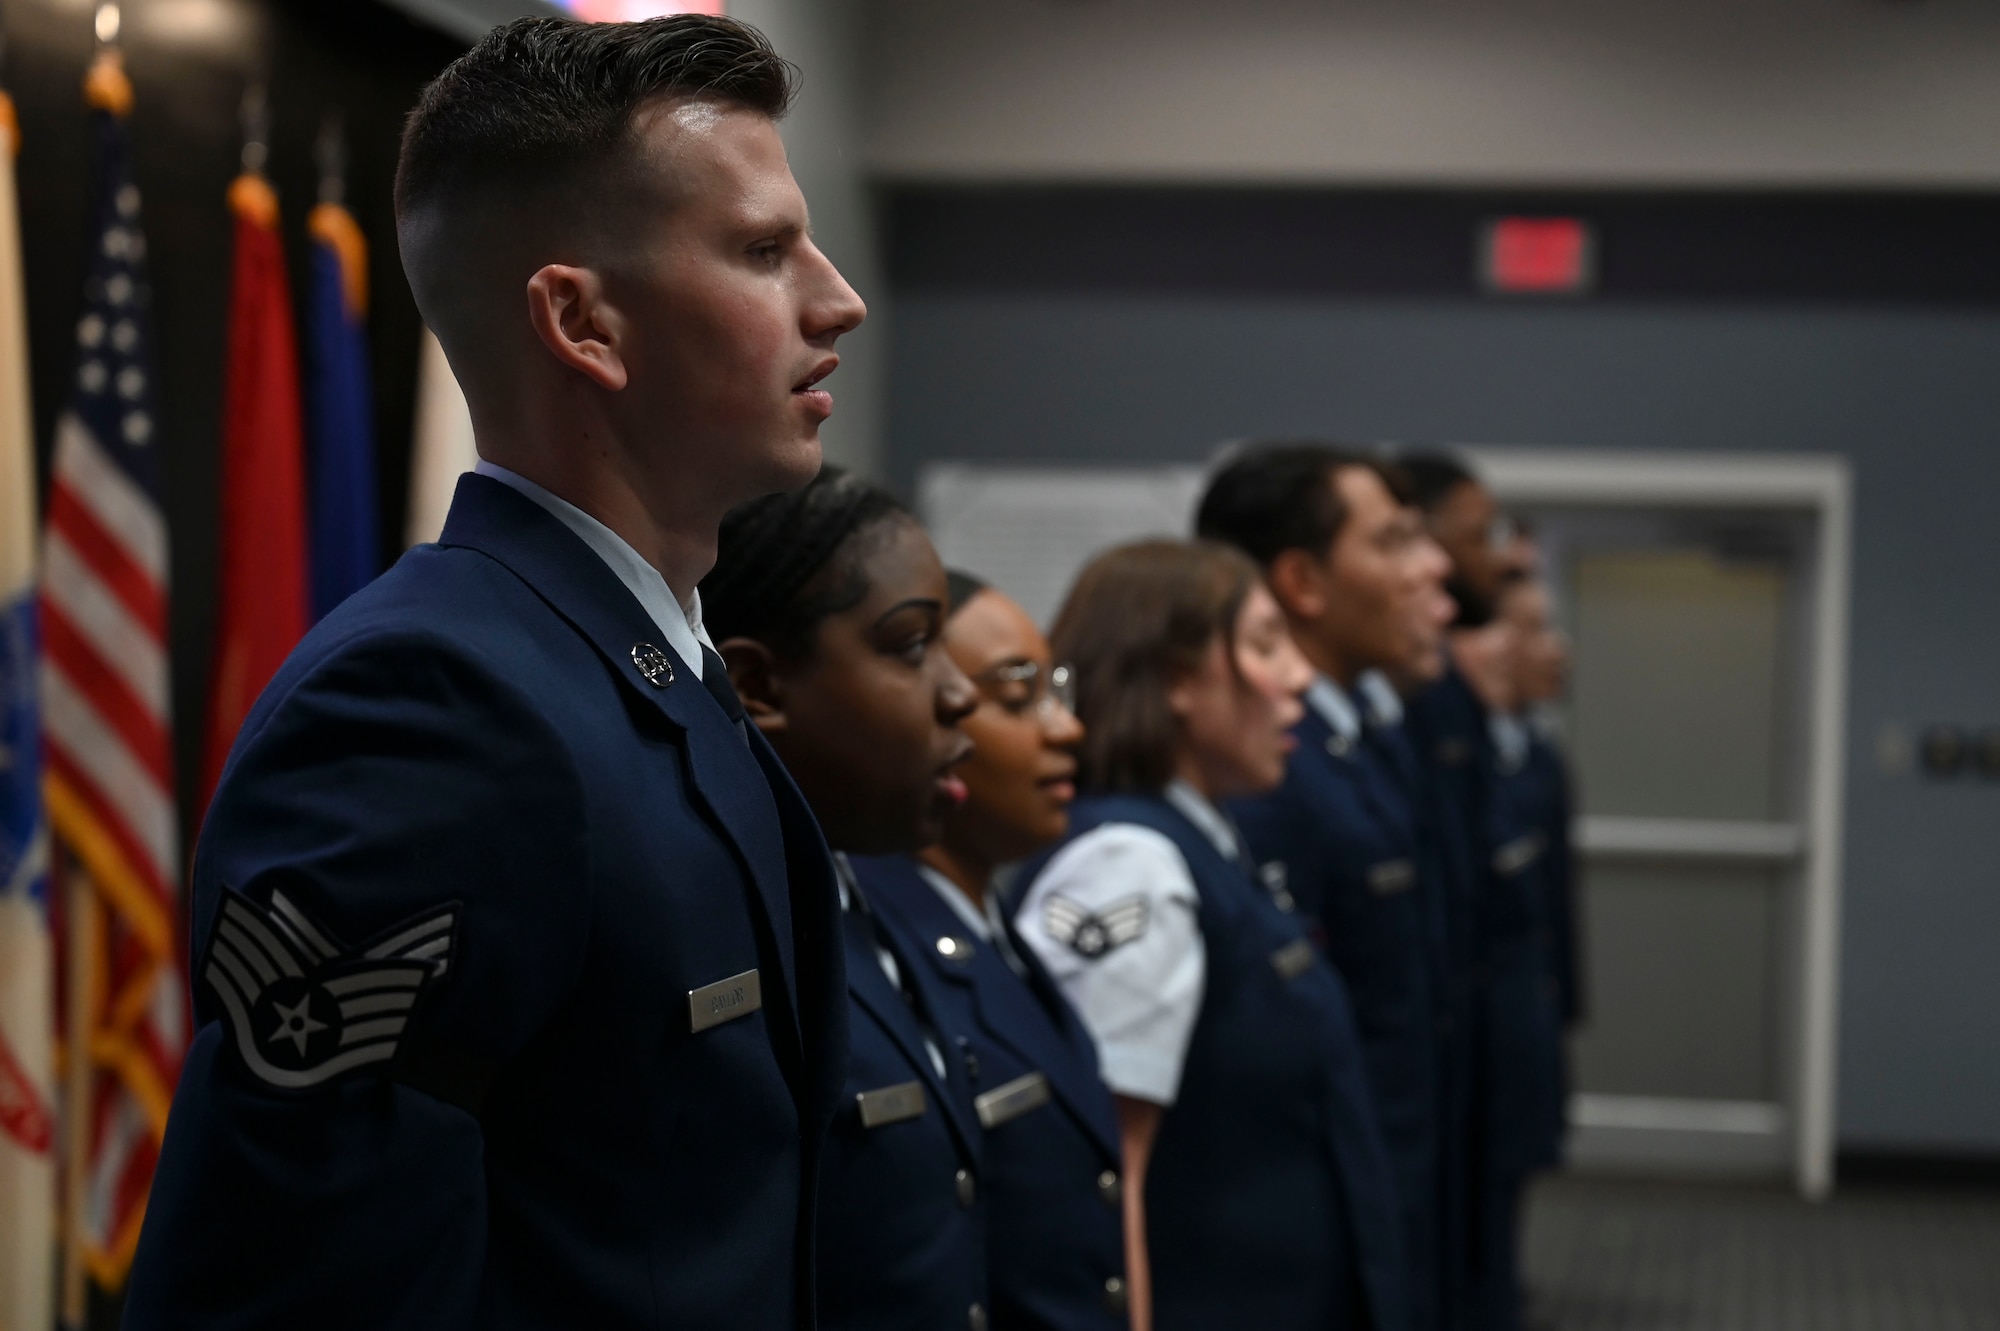 Airman Leadership School Class 24-C graduates sing “The U.S. Air Force” at the end of their graduation ceremony at the Powell Event Center, Goodfellow Air Force Base, Texas, March 29, 2024.  “The U.S. Air Force” is the official song of the United States Air Force. (U.S. Air Force photo by Airman 1st Class Madison Collier)